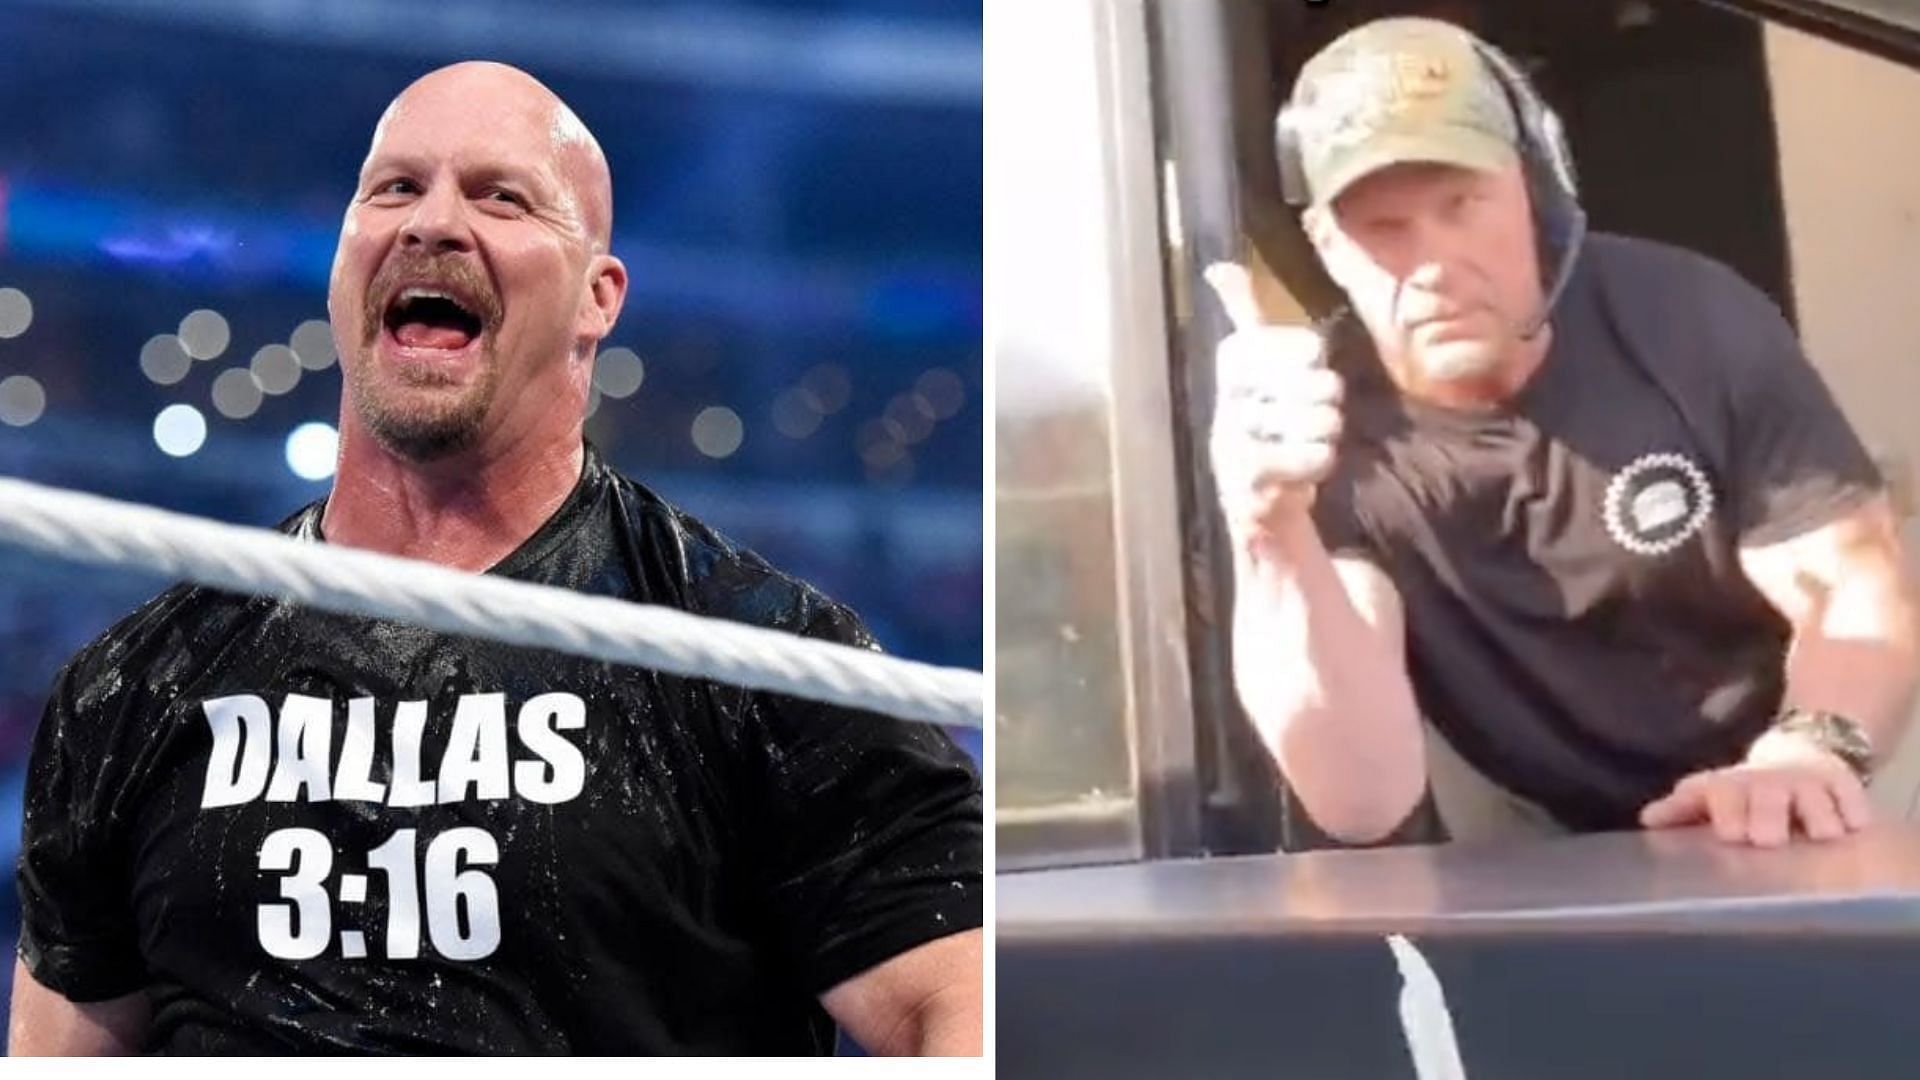 WWE legend Stone Cold Steve Austin is keeping busy.